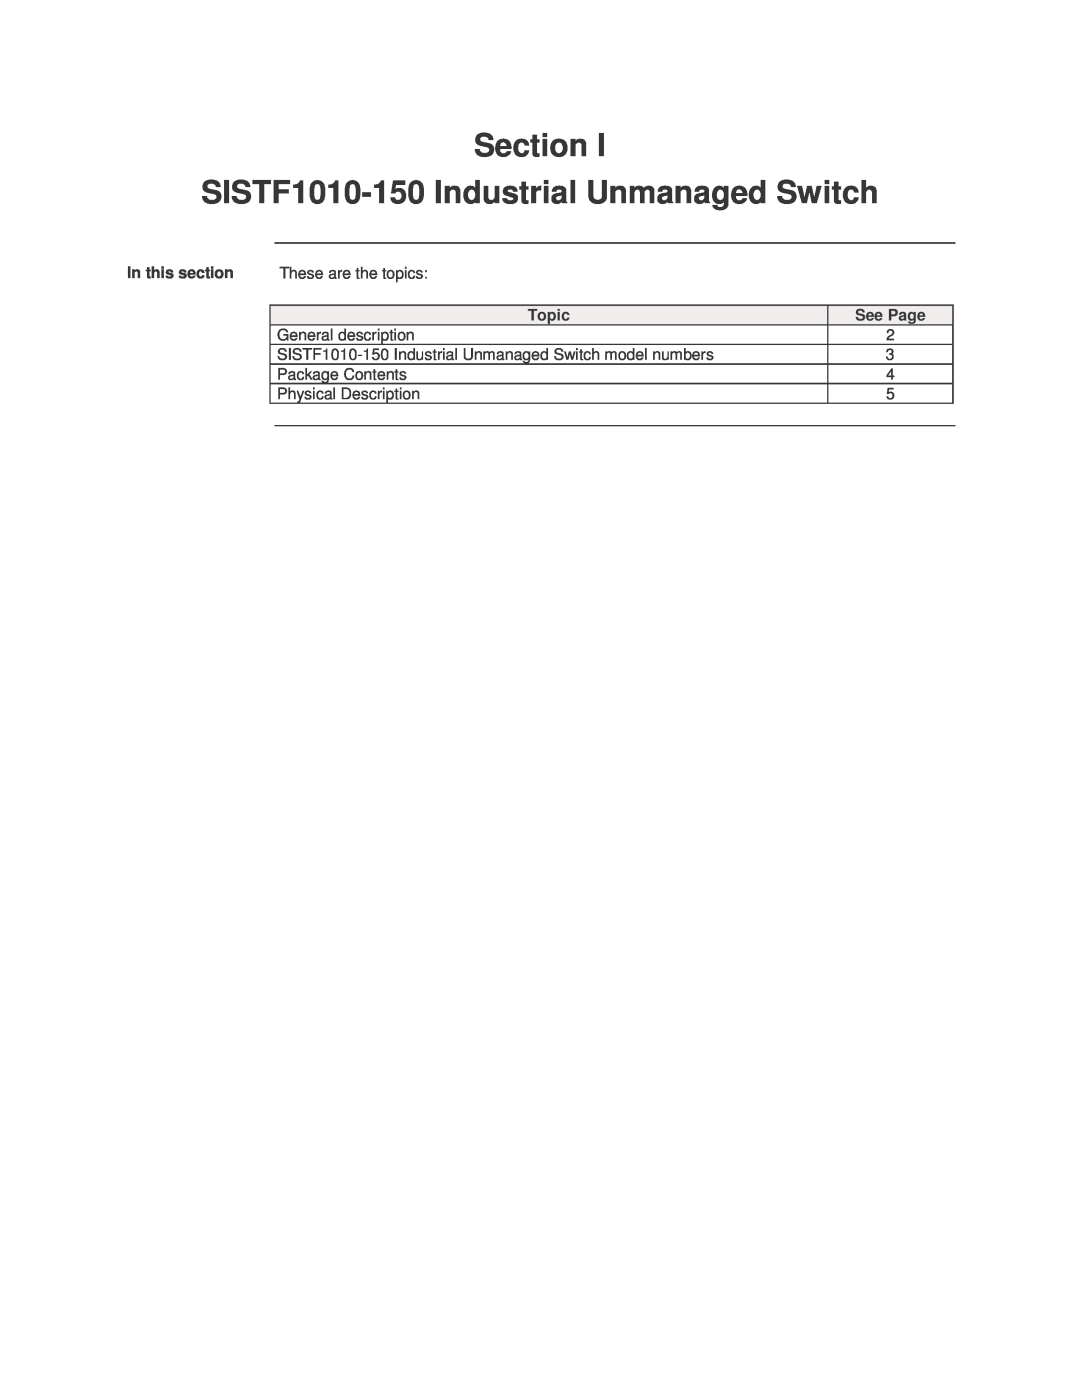 Transition Networks SISTF1010-150-LR(T) Section SISTF1010-150 Industrial Unmanaged Switch, In this section, Topic 